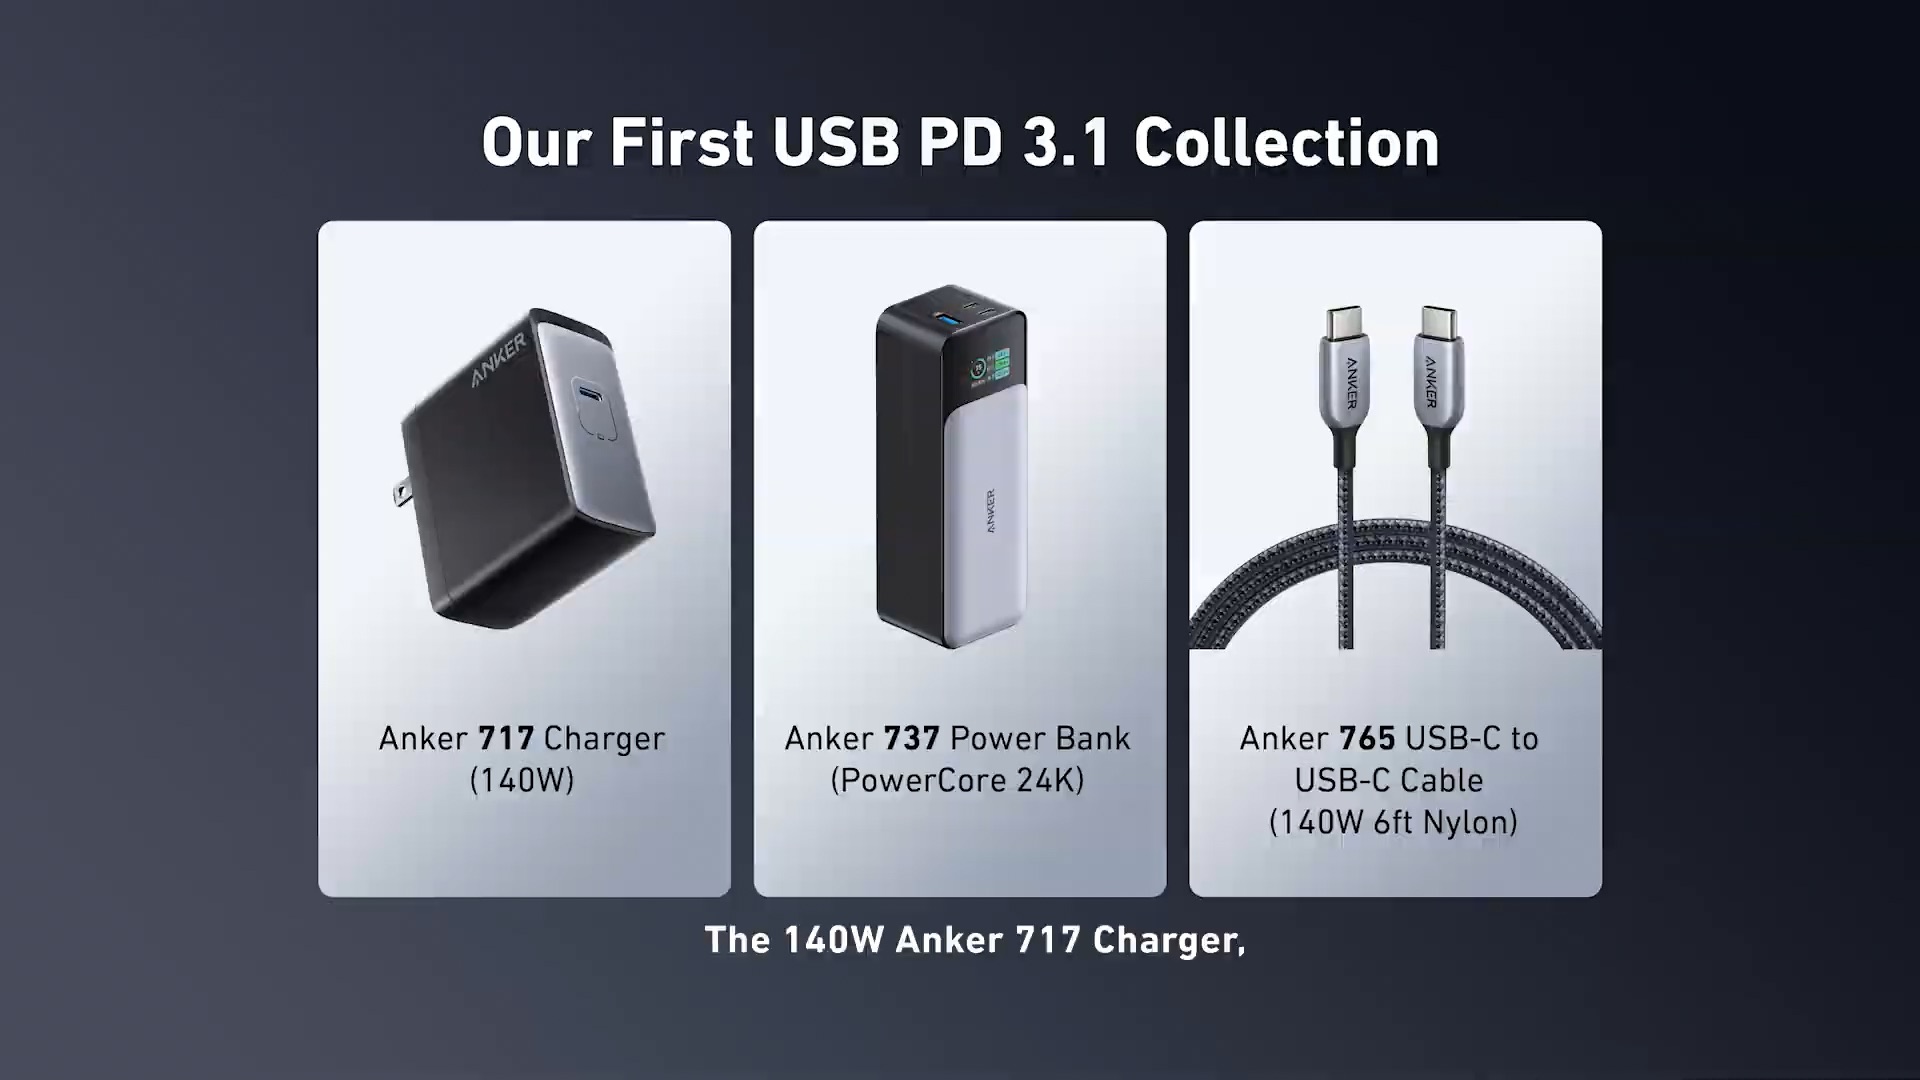 Anker USB-C Power Delivery Revision 3.1 collection